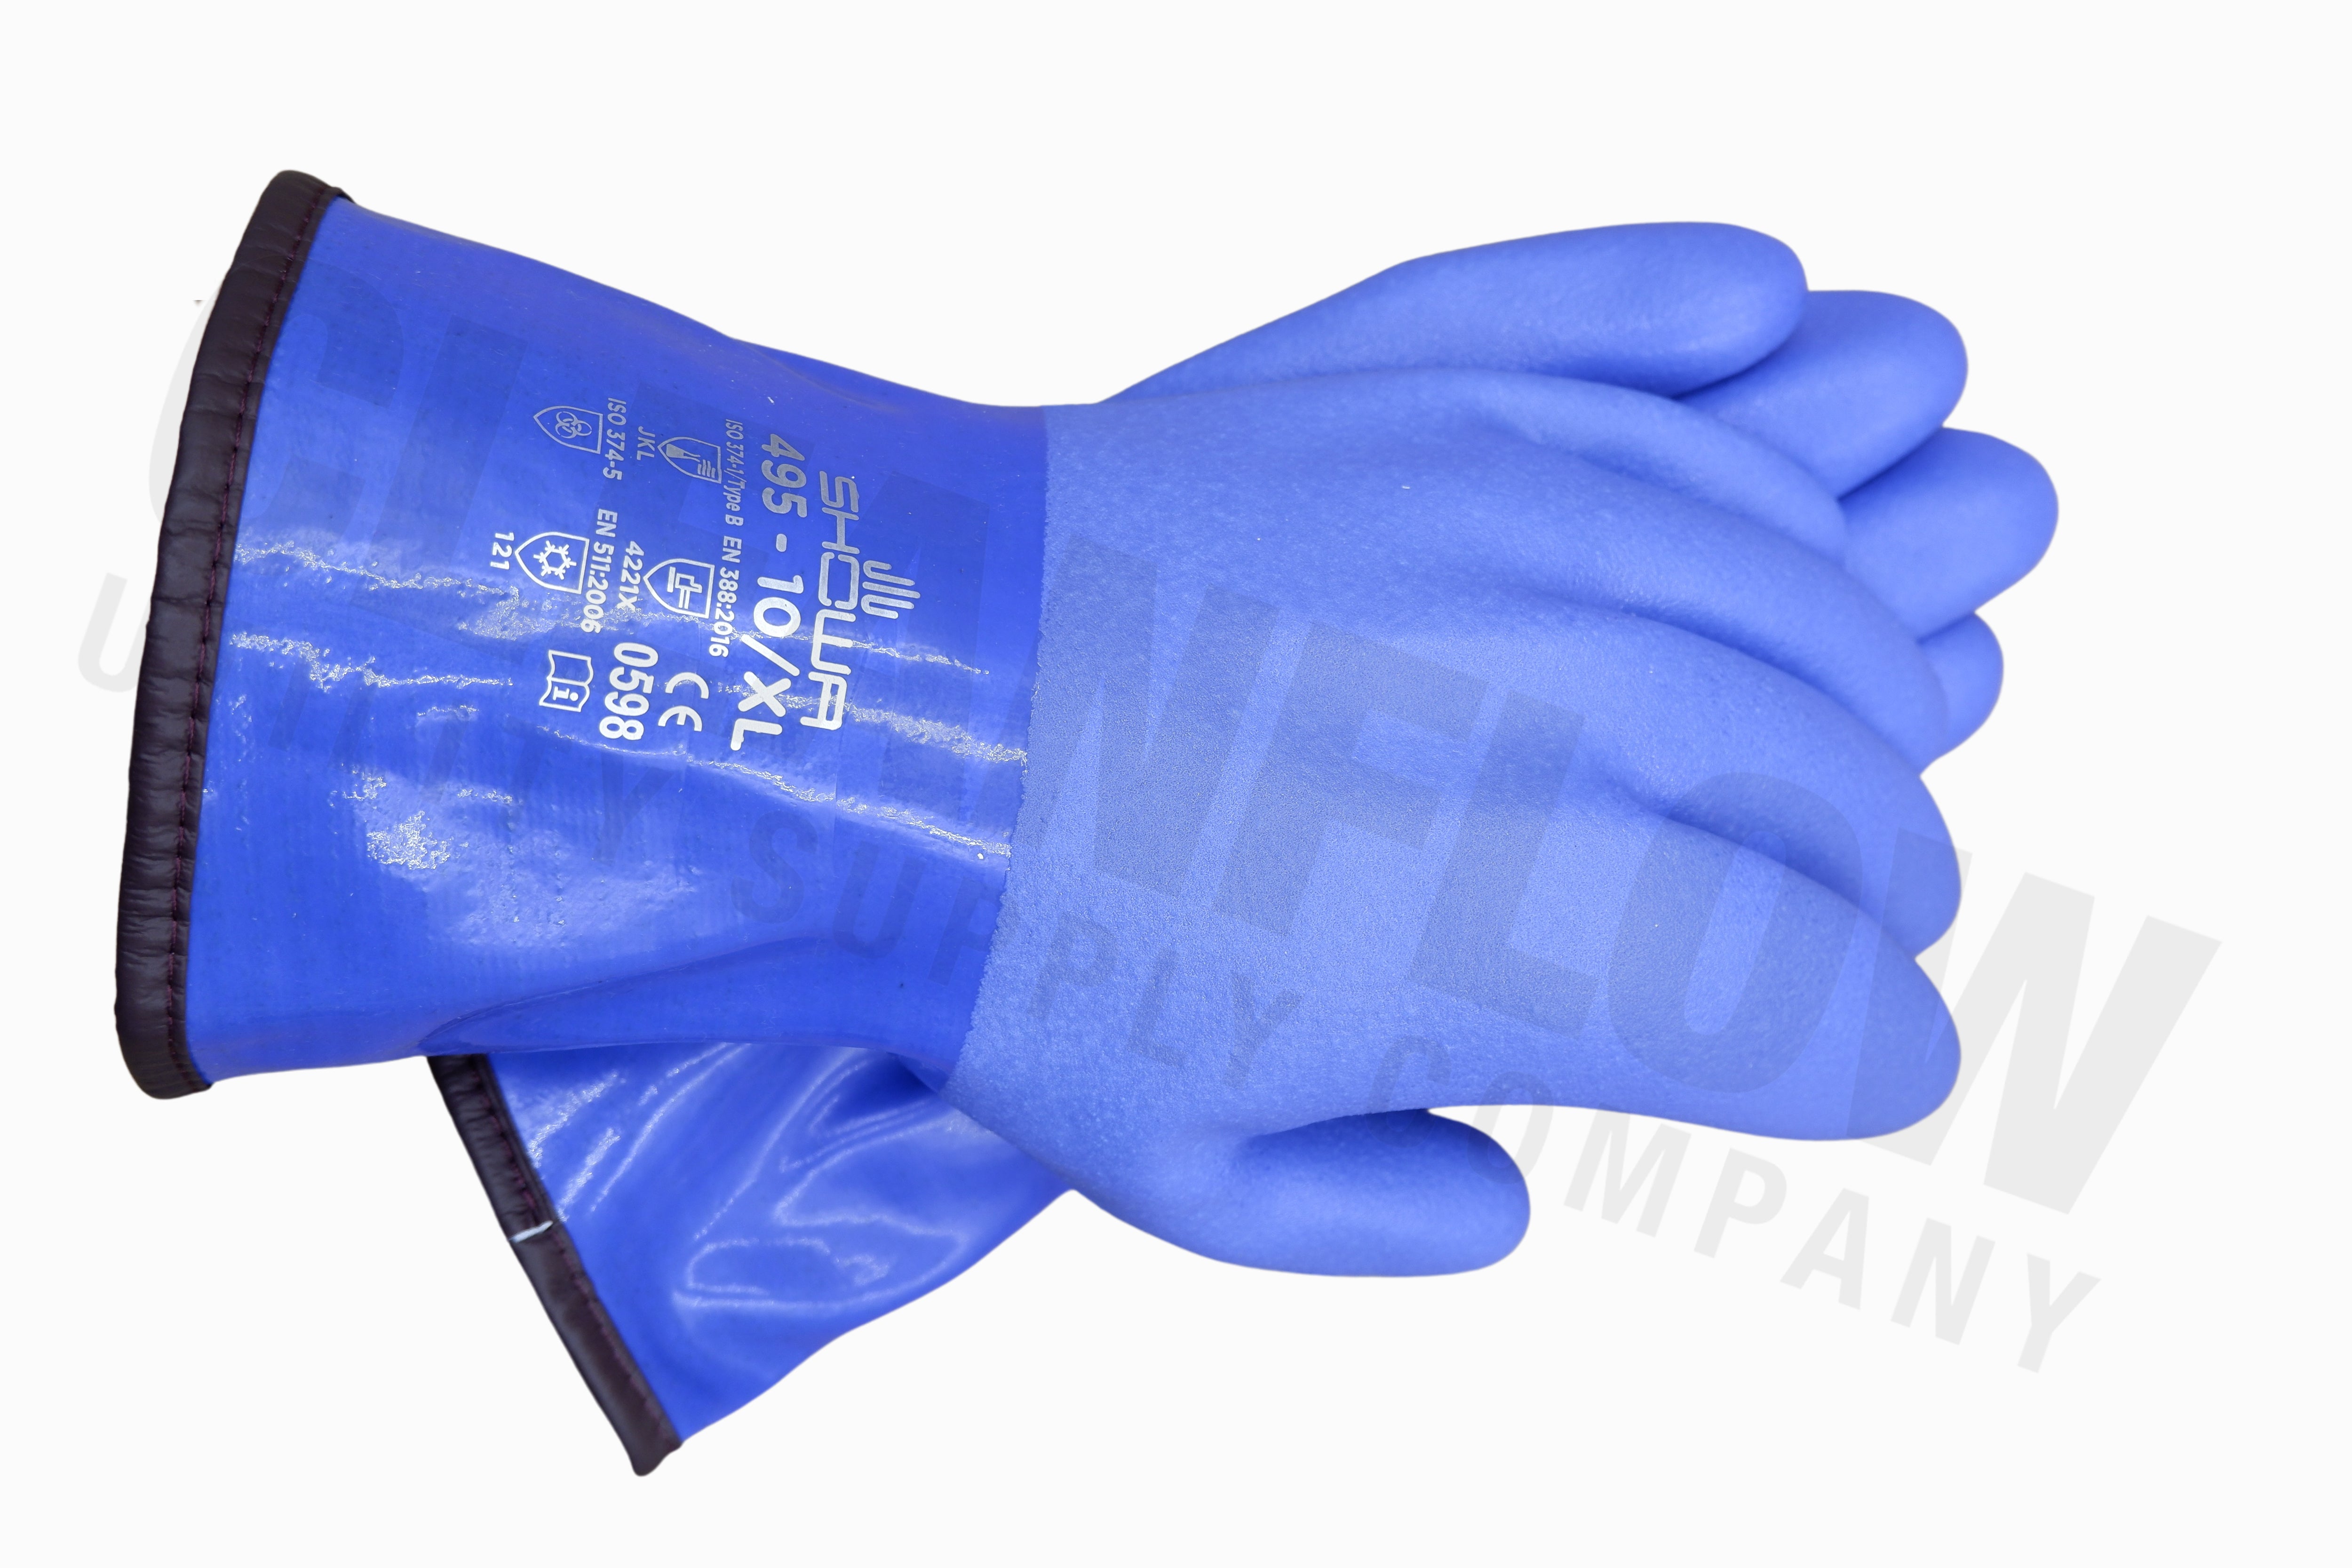 Showa 495 Rough Grip PVC Glove with Removable Acrylic Liner